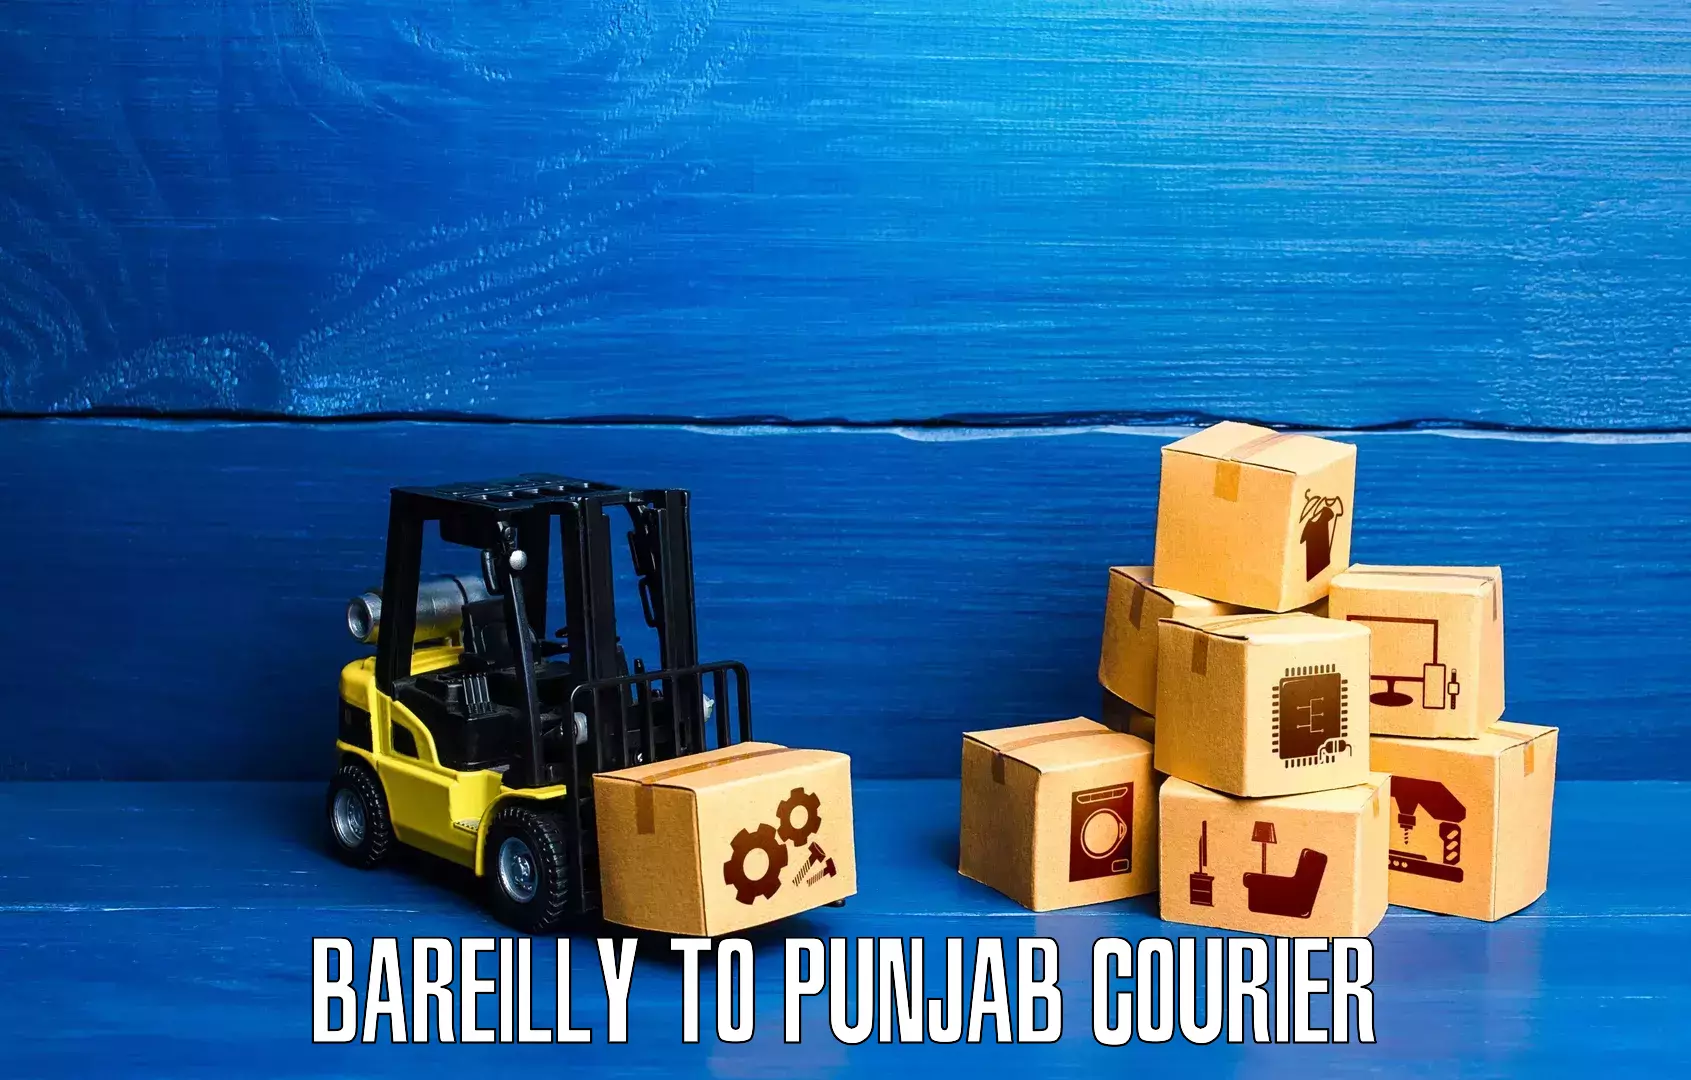 Courier service innovation Bareilly to Phillaur